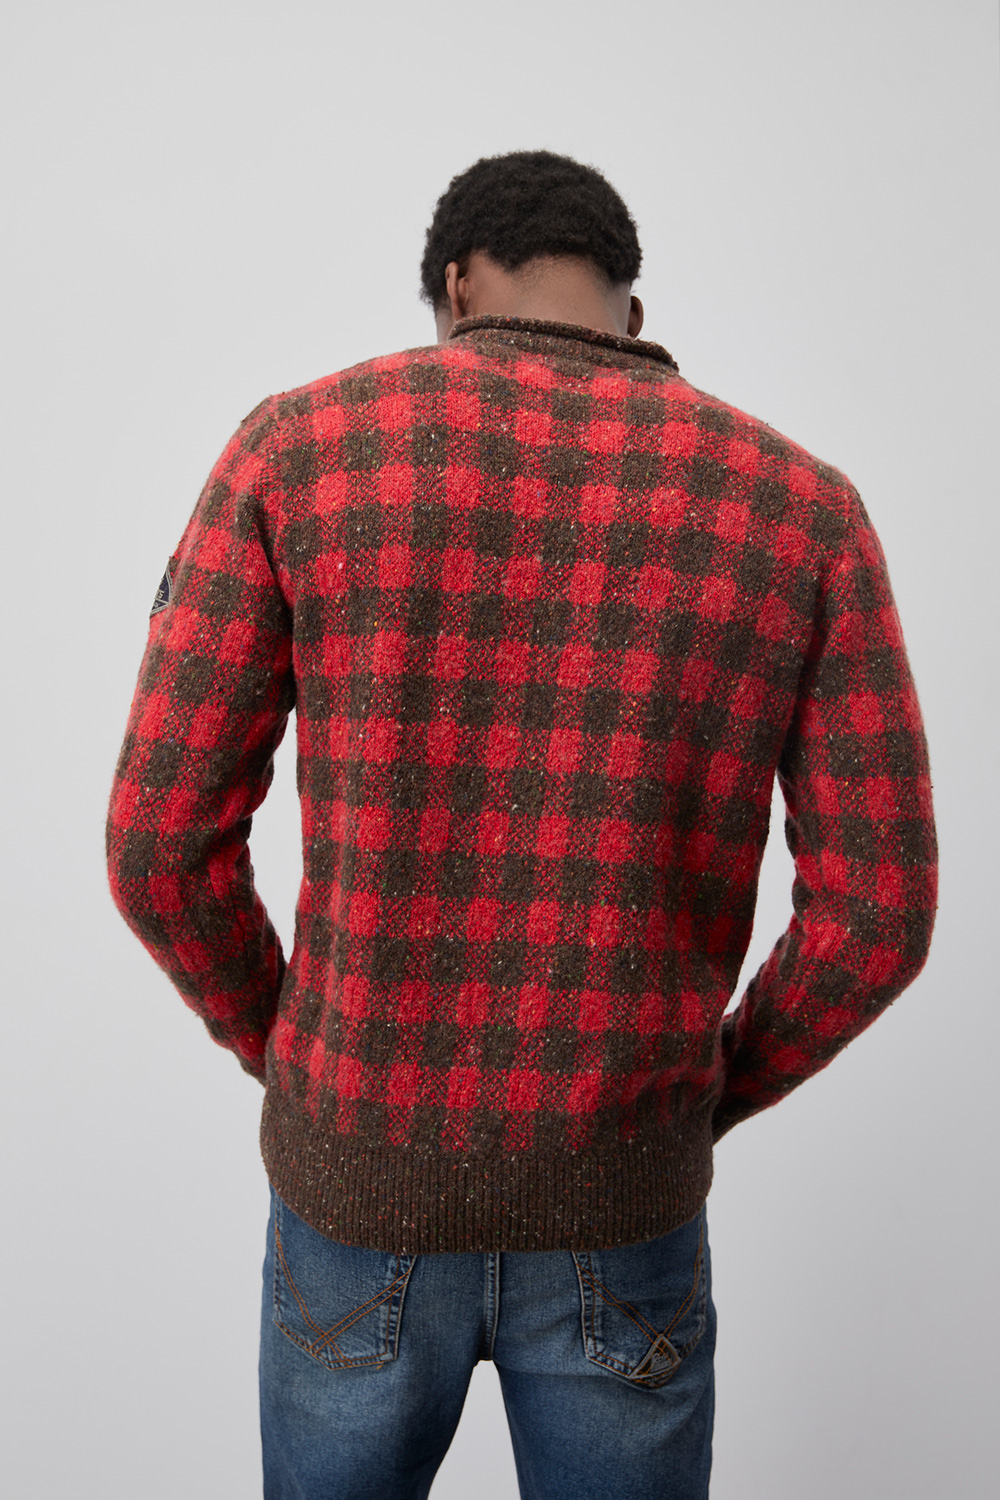 ROY ROGERS: CREW NECK SWEATER IN CHECK PRINT TEXTURED YARN